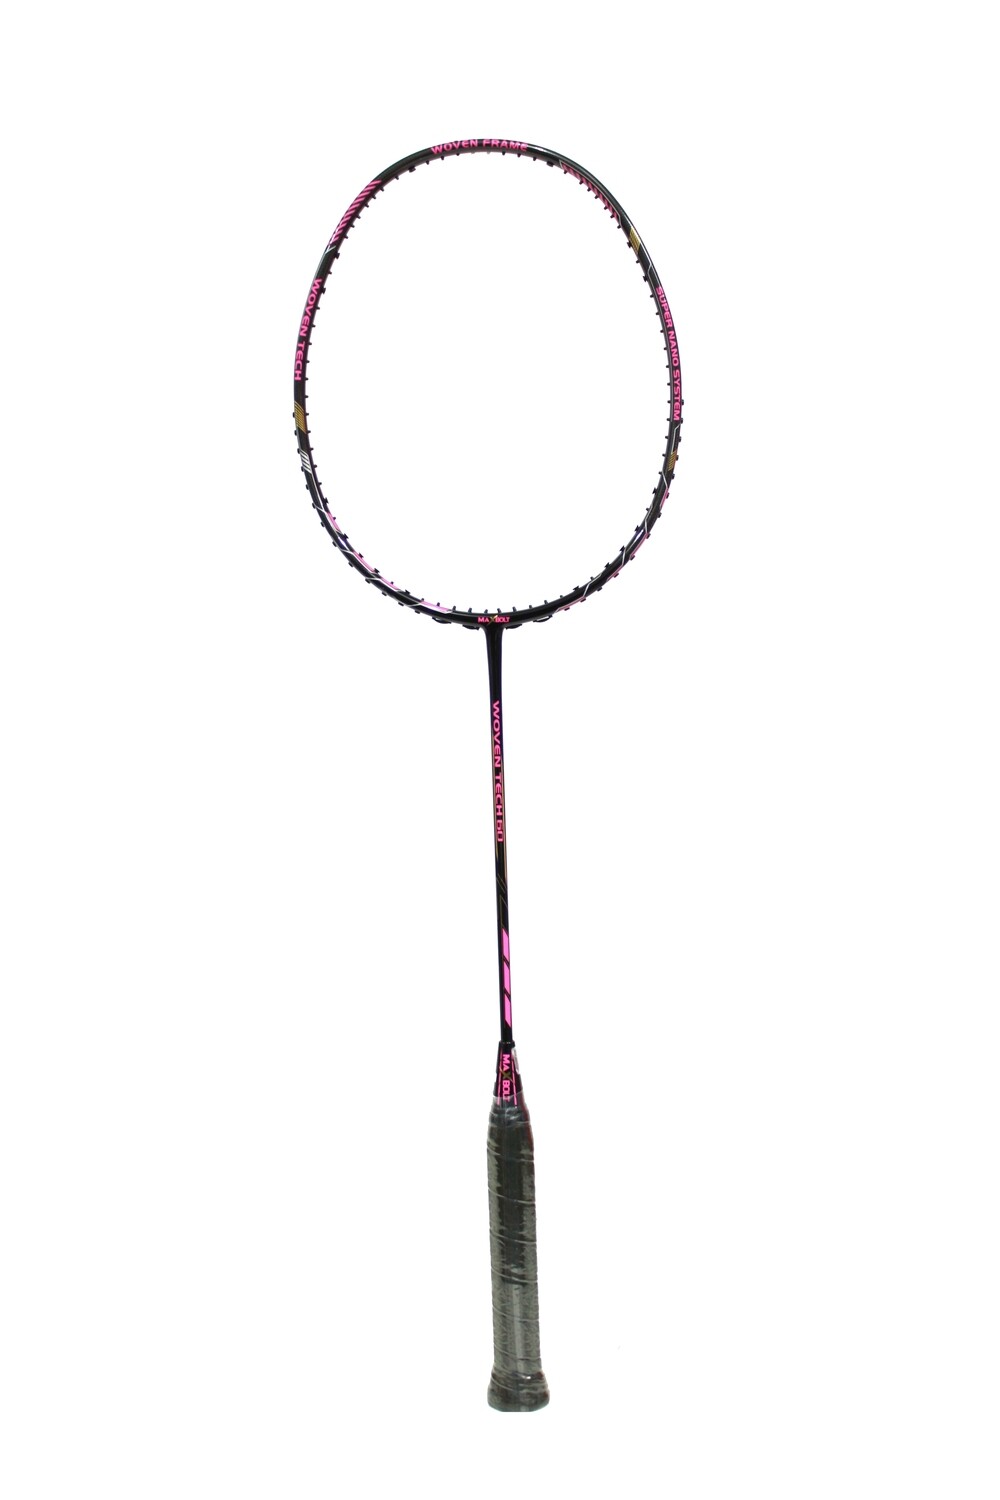 MaxBolt Woven Tech 60 Pink Badminton Racket- with Full Cover